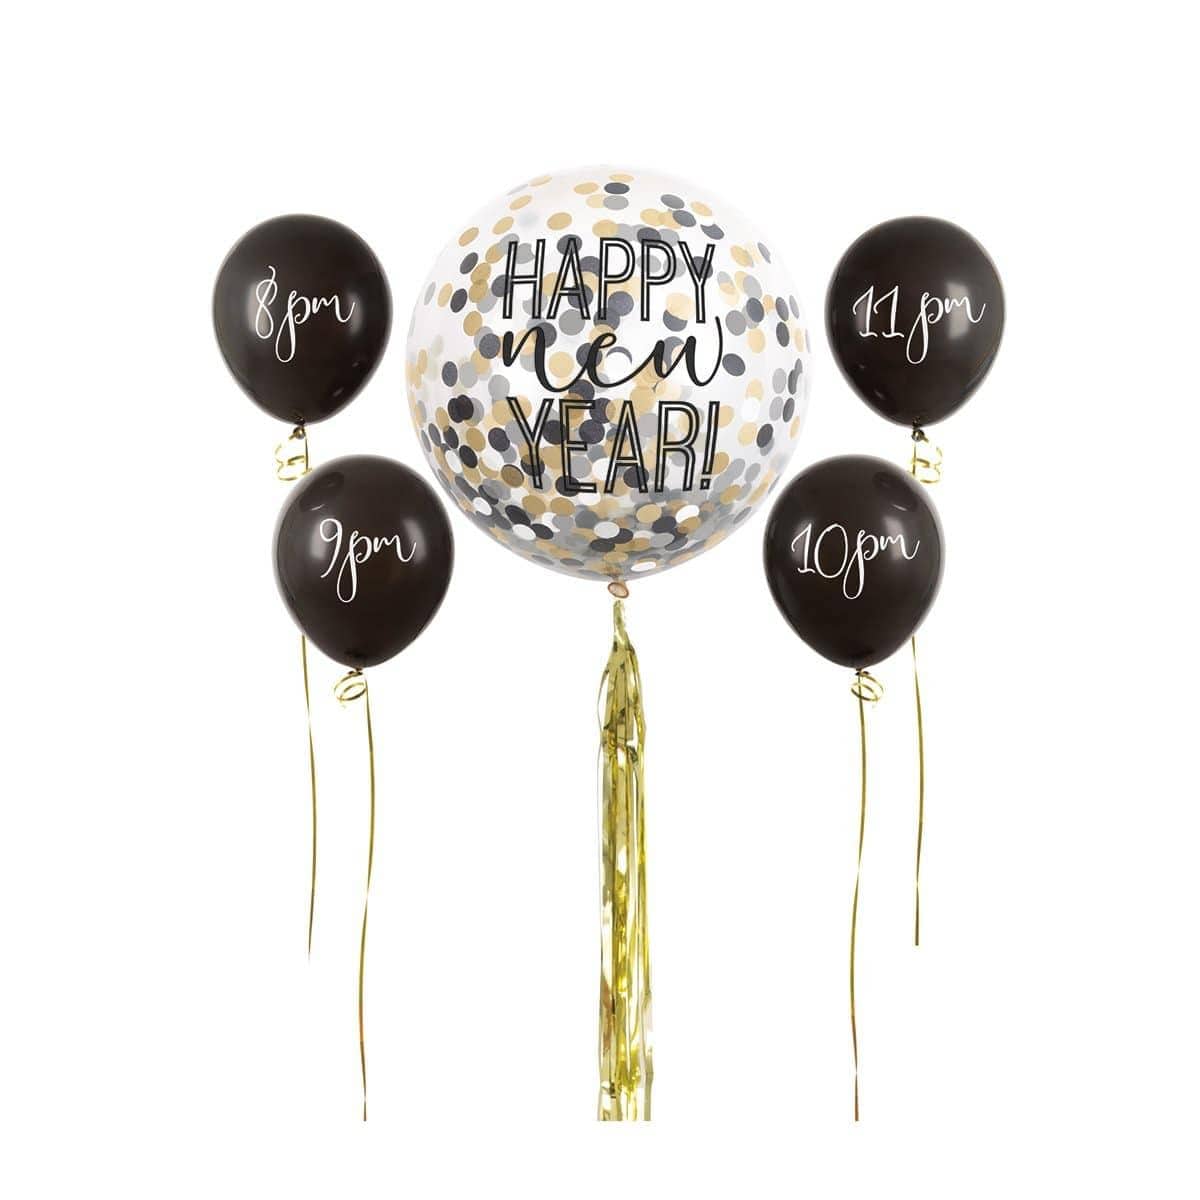 Buy New Year New Year's Countdown Balloon Kit sold at Party Expert